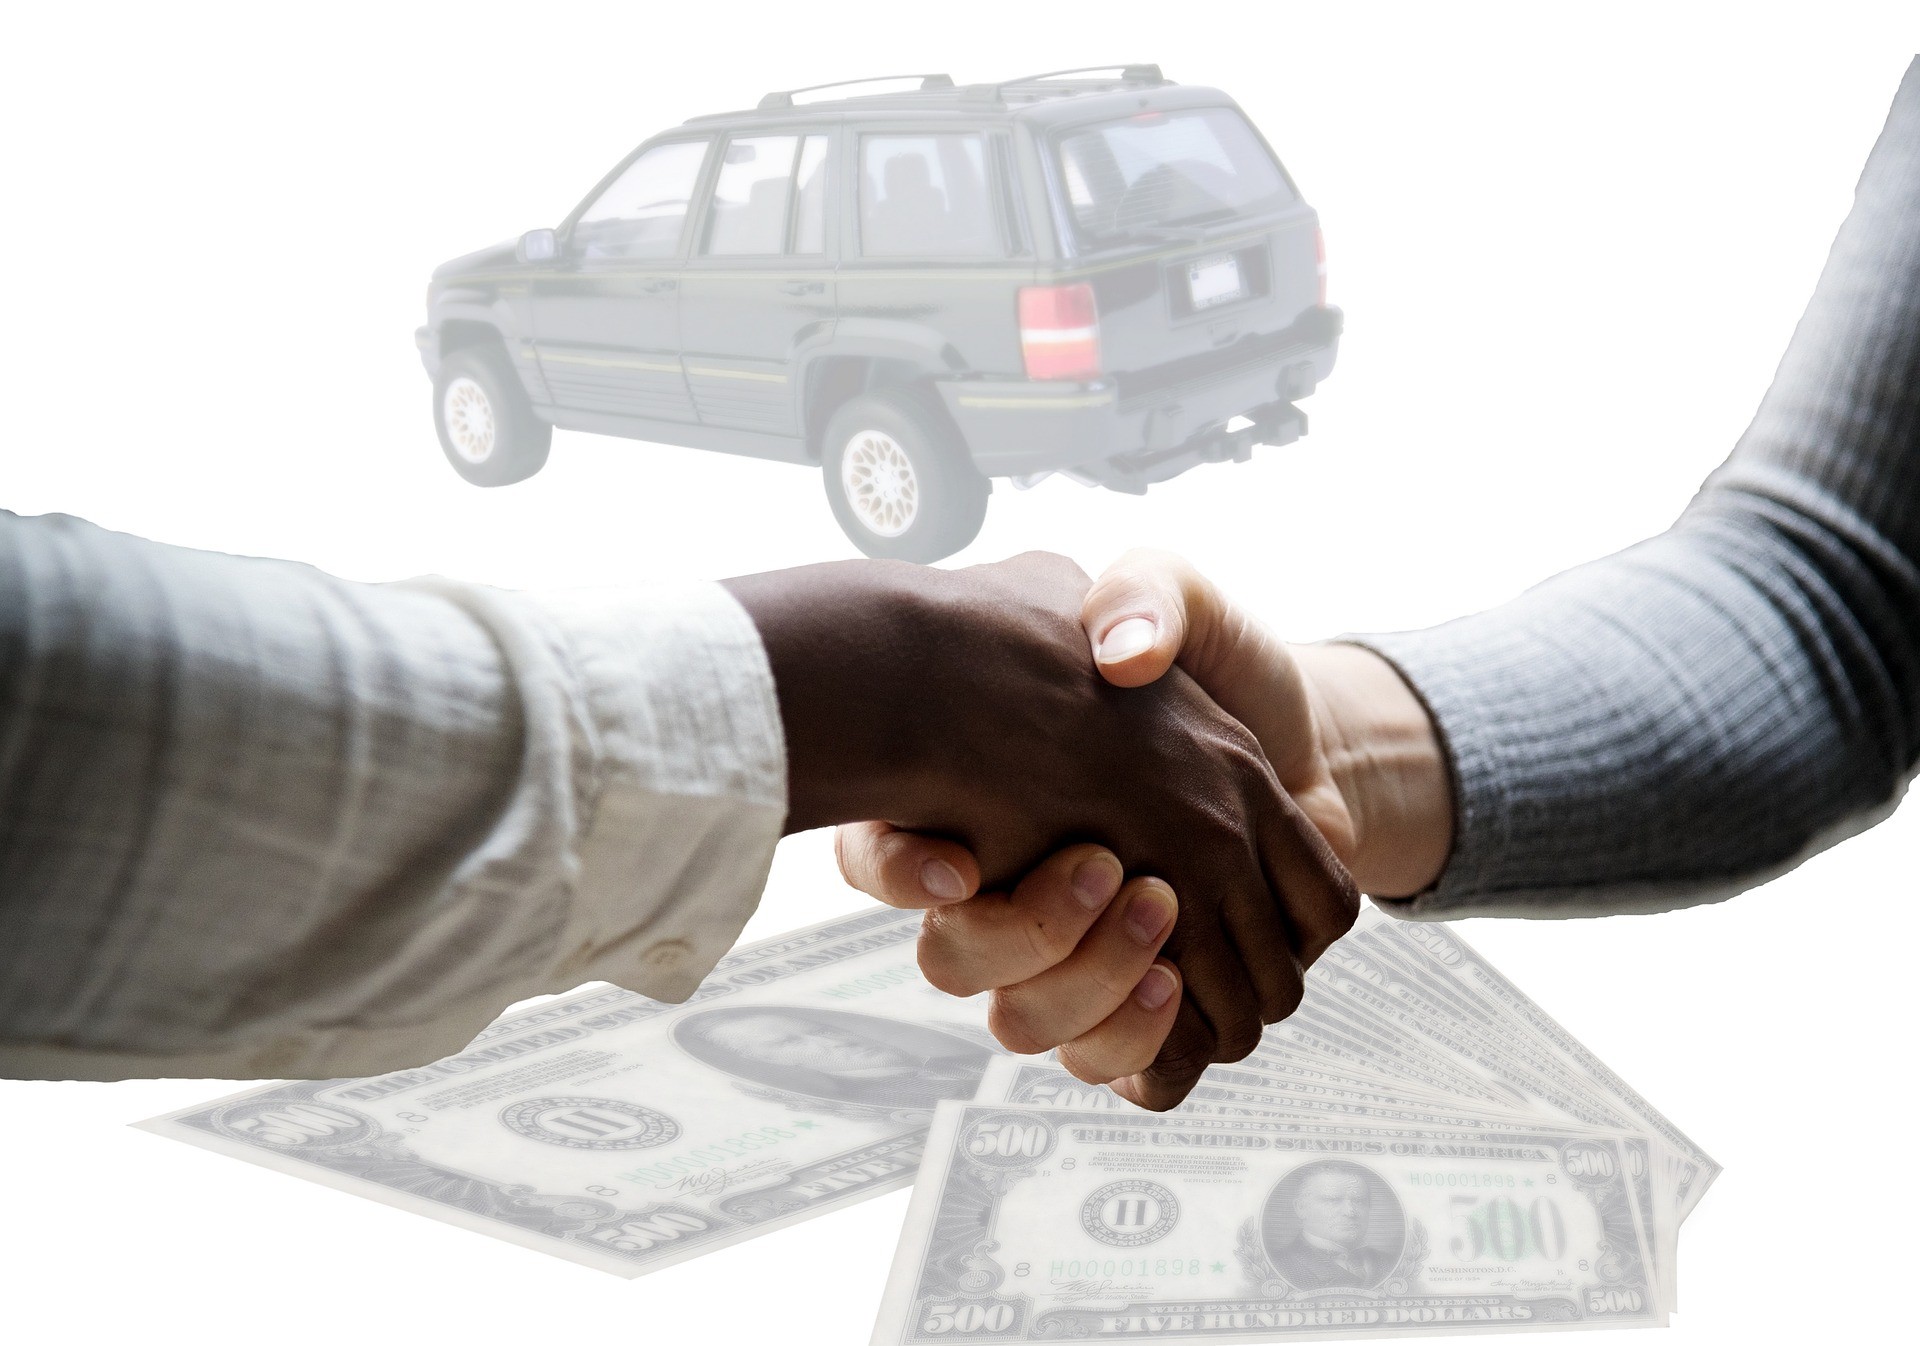 Selling Your Car Online for Cash VS Traditional Methods